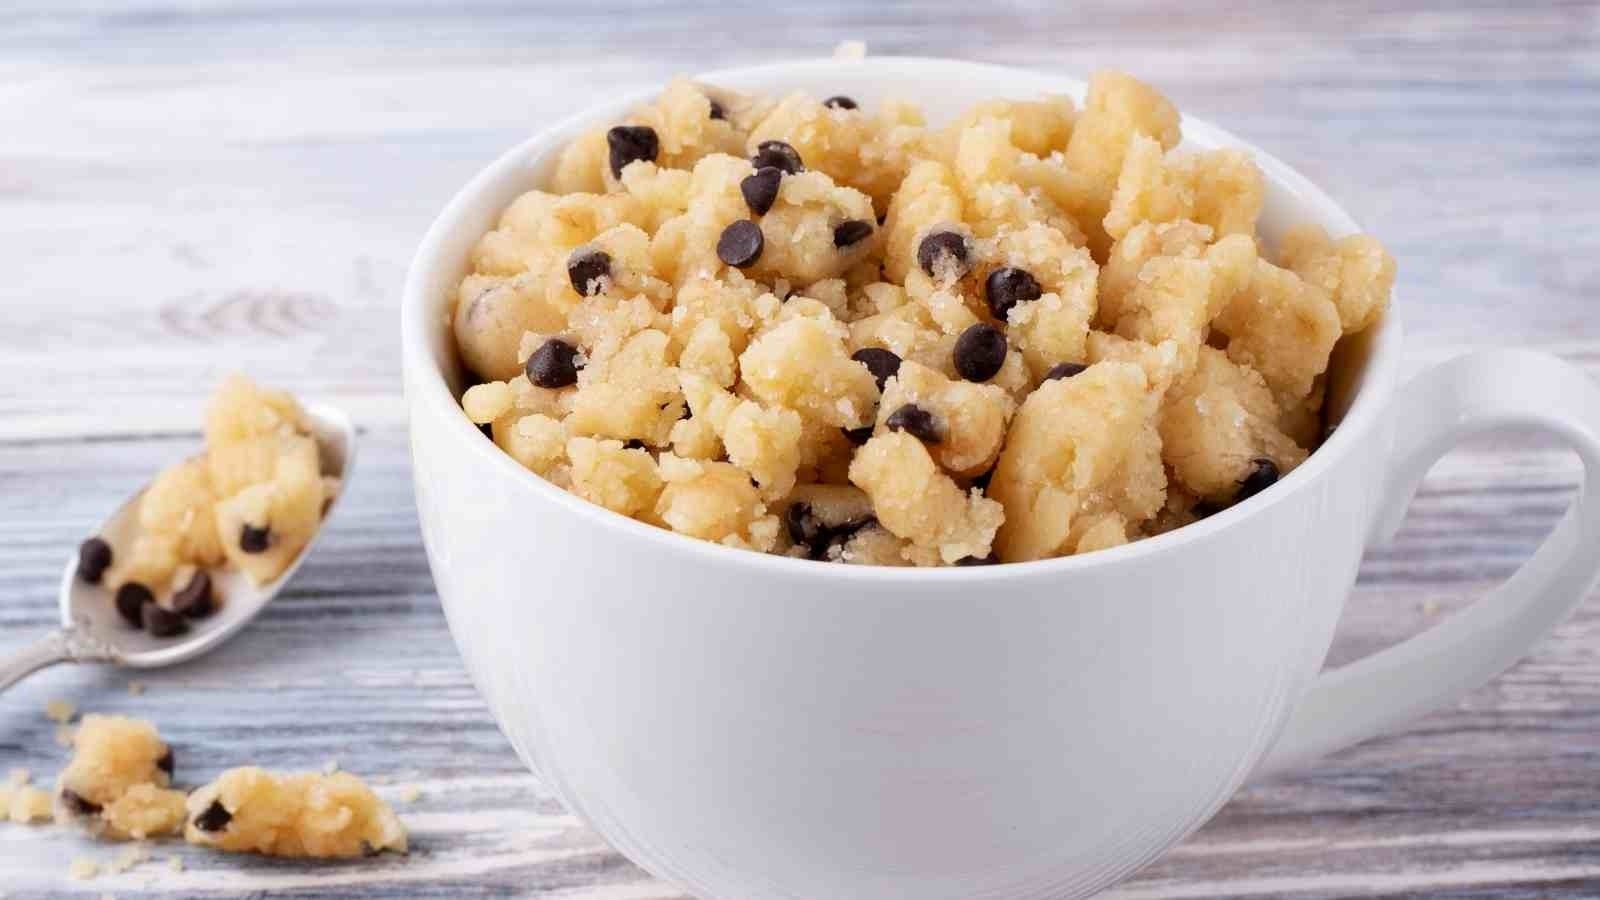 ndulge Your Sweet Tooth: Irresistible Edible Cookie Dough Recipe